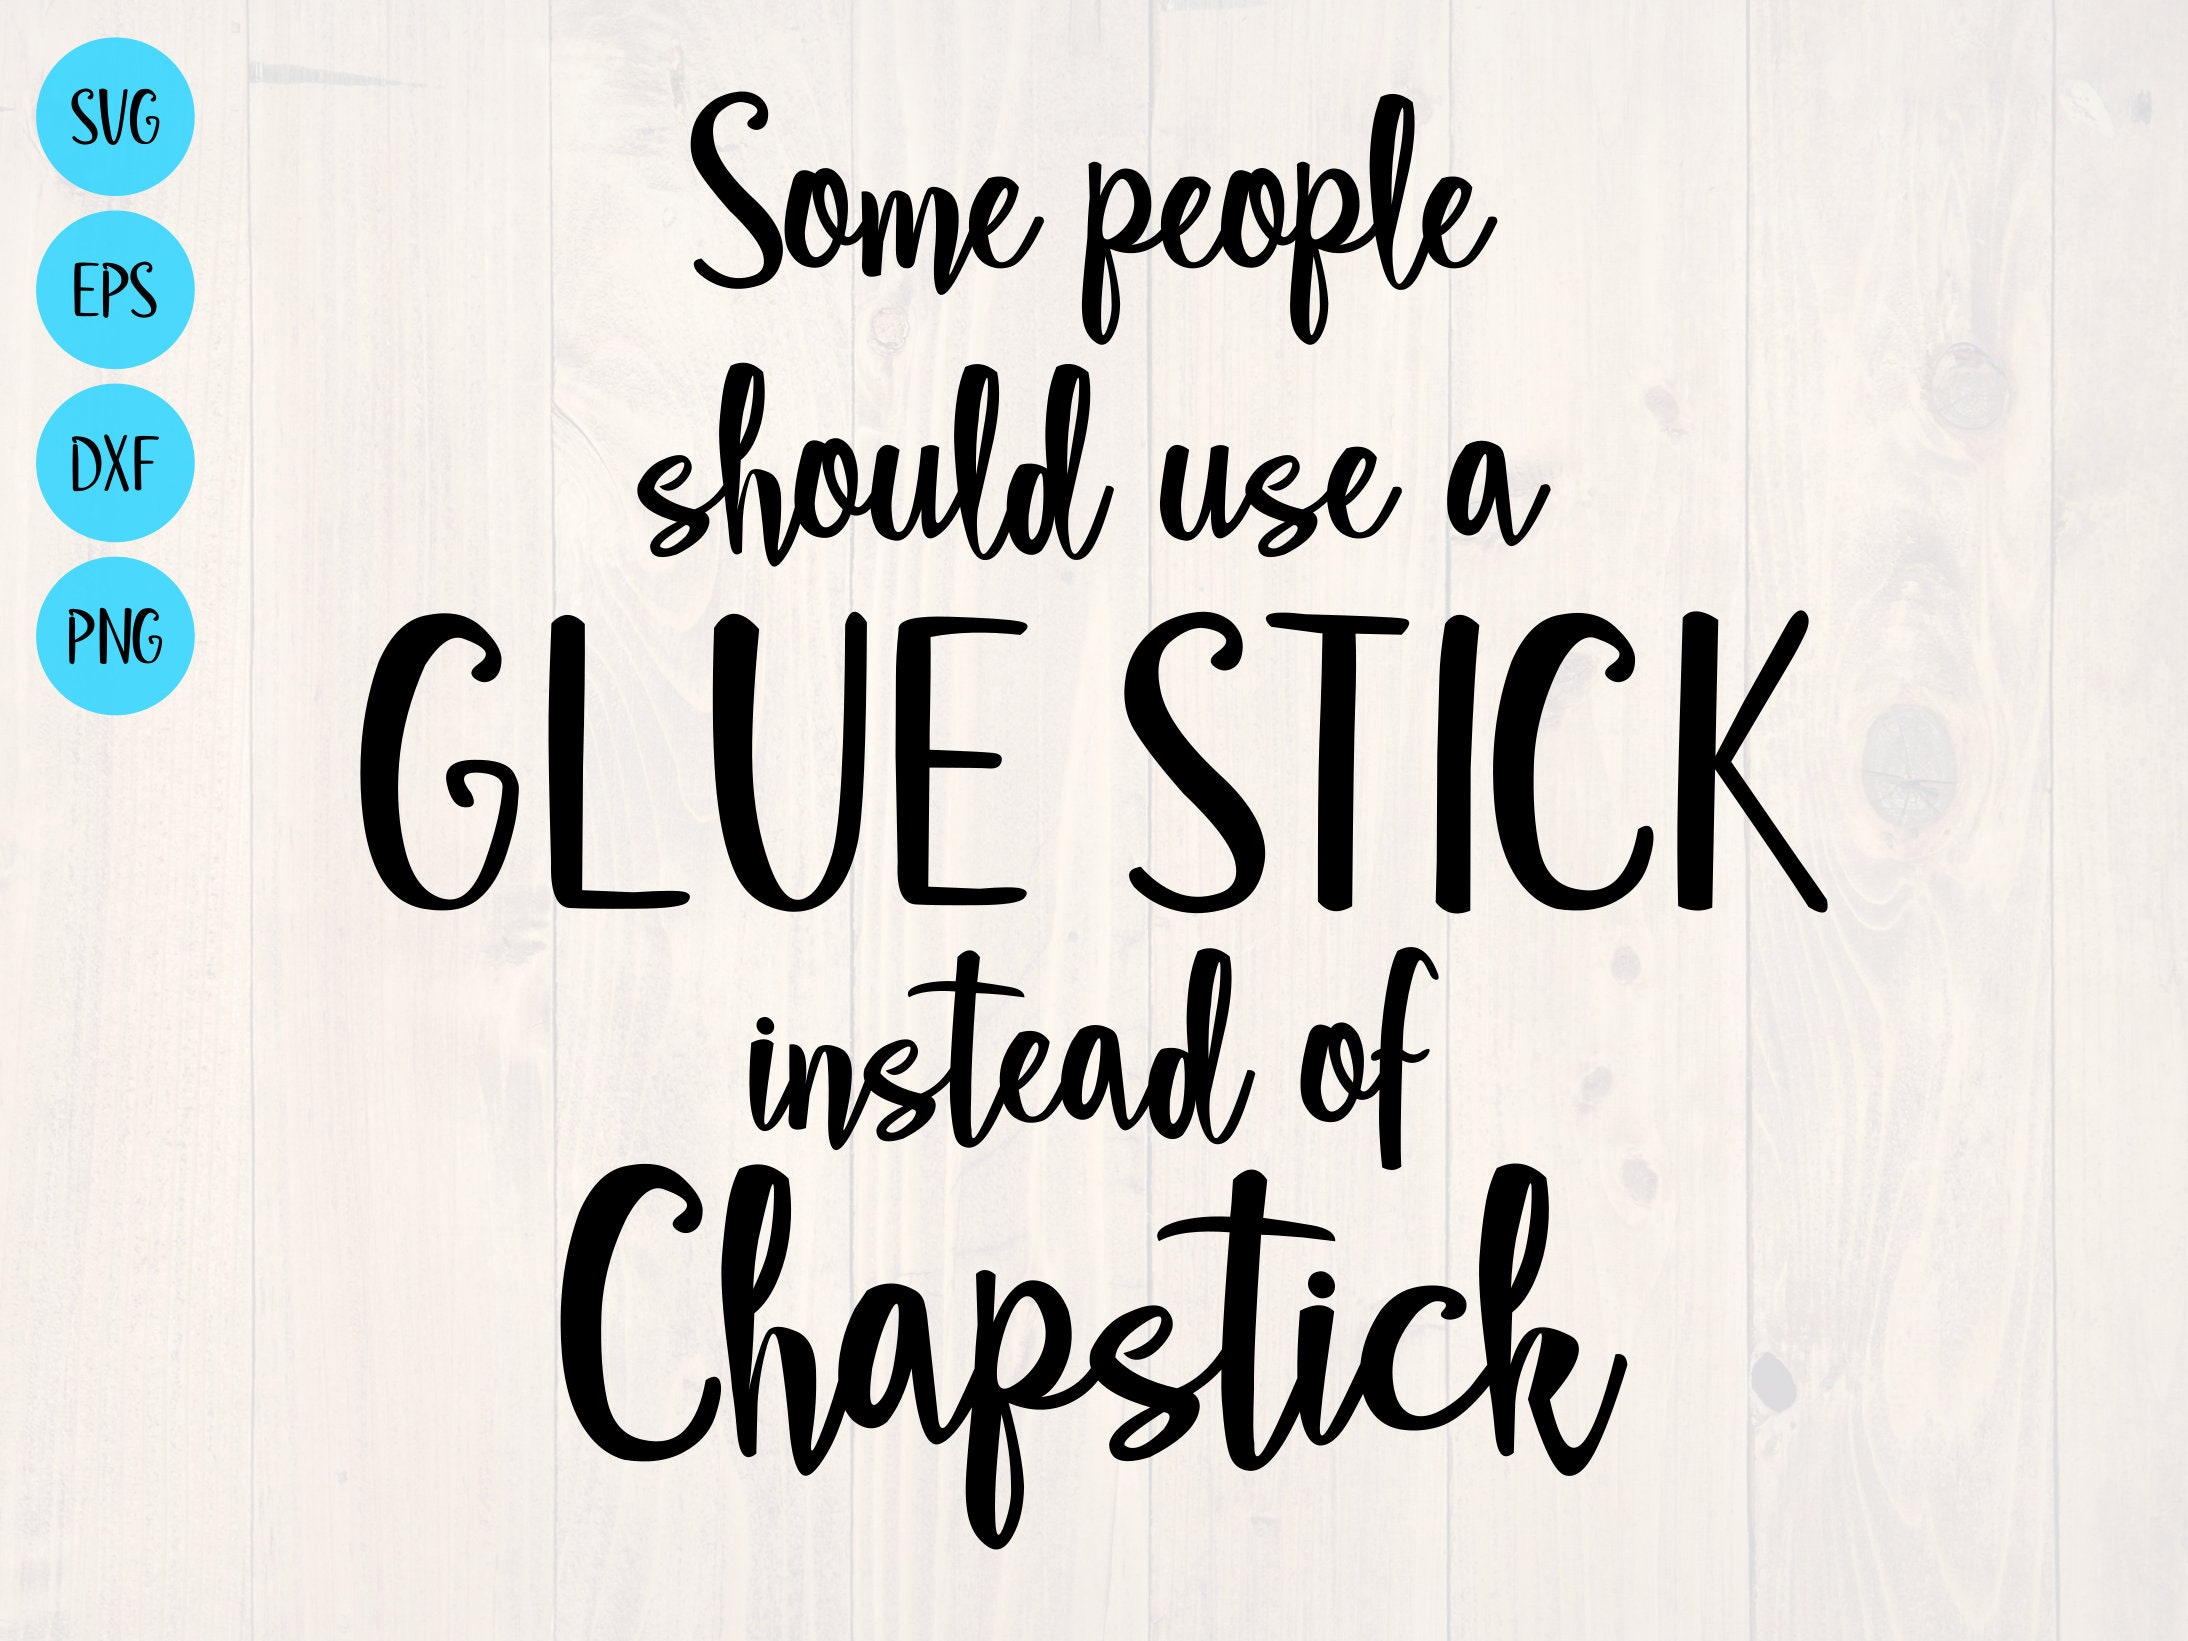 Some People Should Use A Gluestick Instead of Chapstick Digital Download  PNG 300DPI Sublimation Waterslide Screen Print 